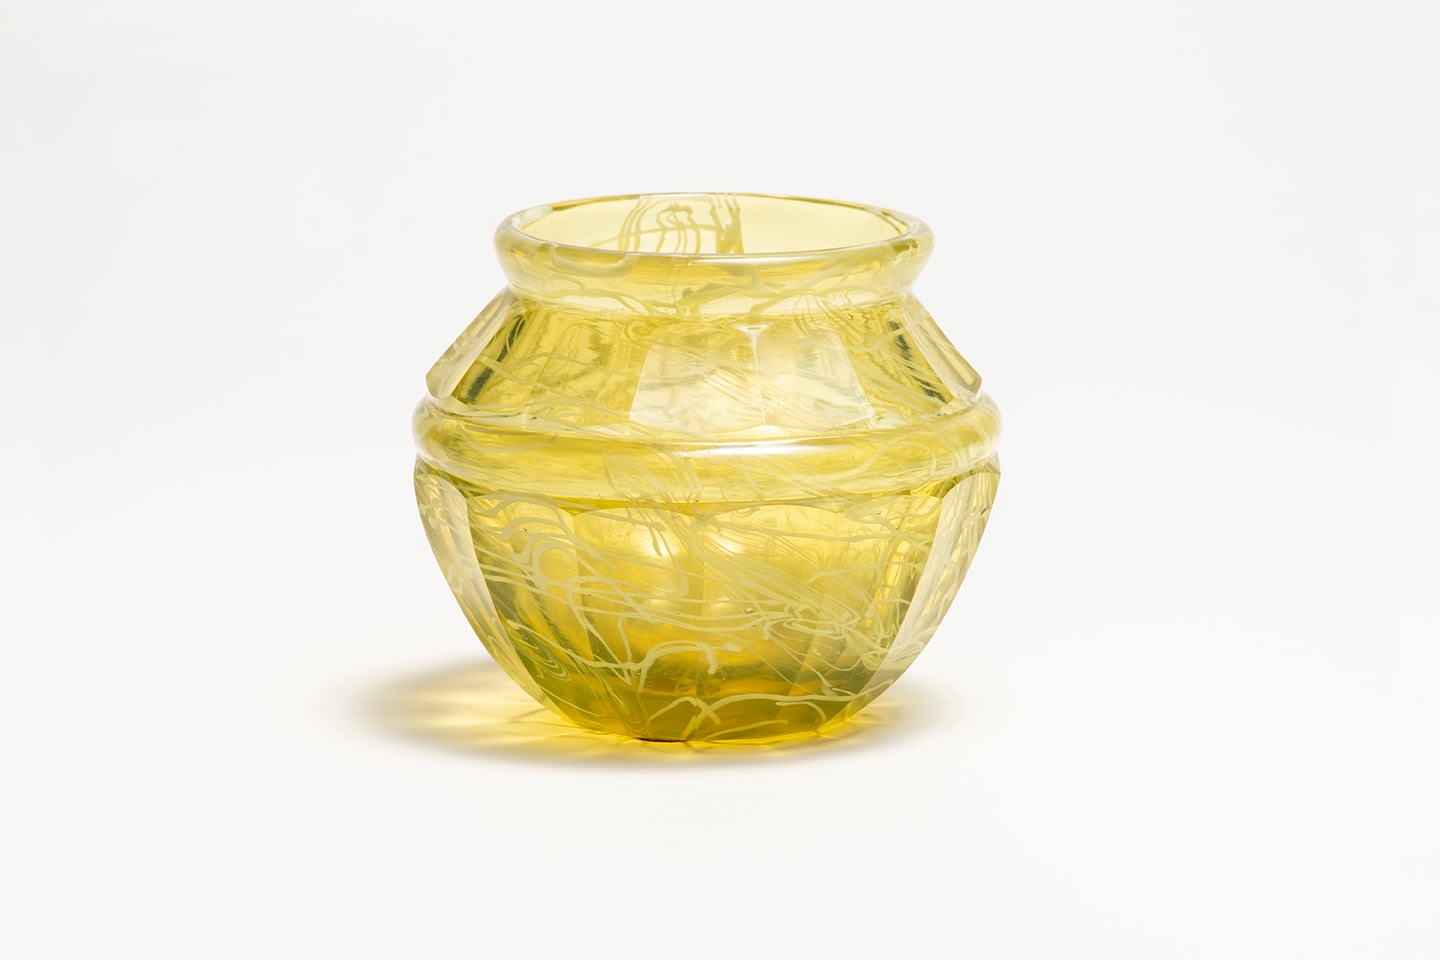 a small tiffany glass vase in transparent yellow glass with internal decoration of thin abstract swirls in creamy white, the surface with hand cut facets